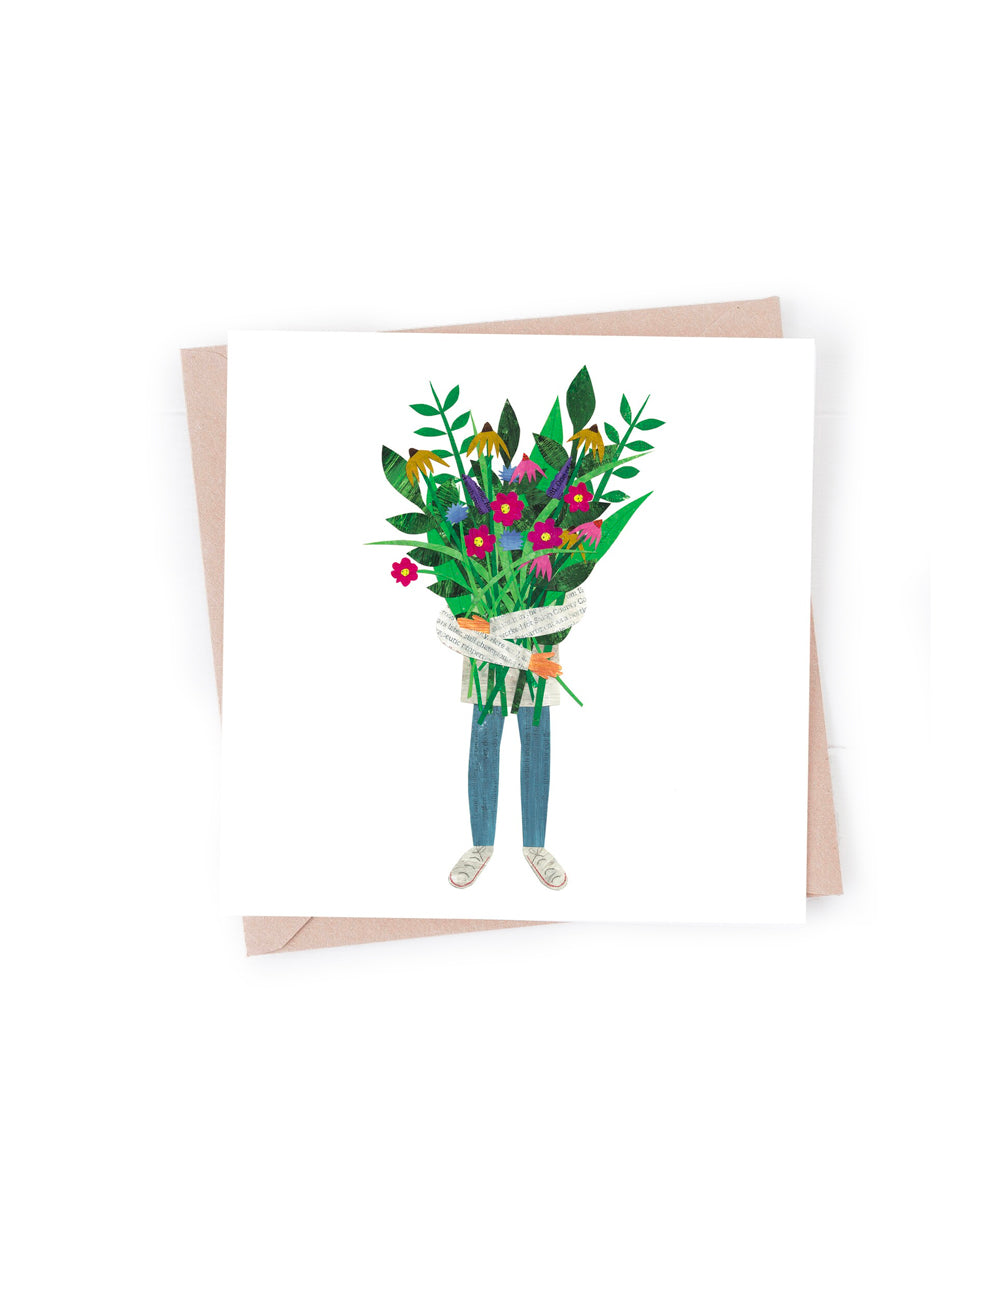 Say It With Flowers. Greetings Card.